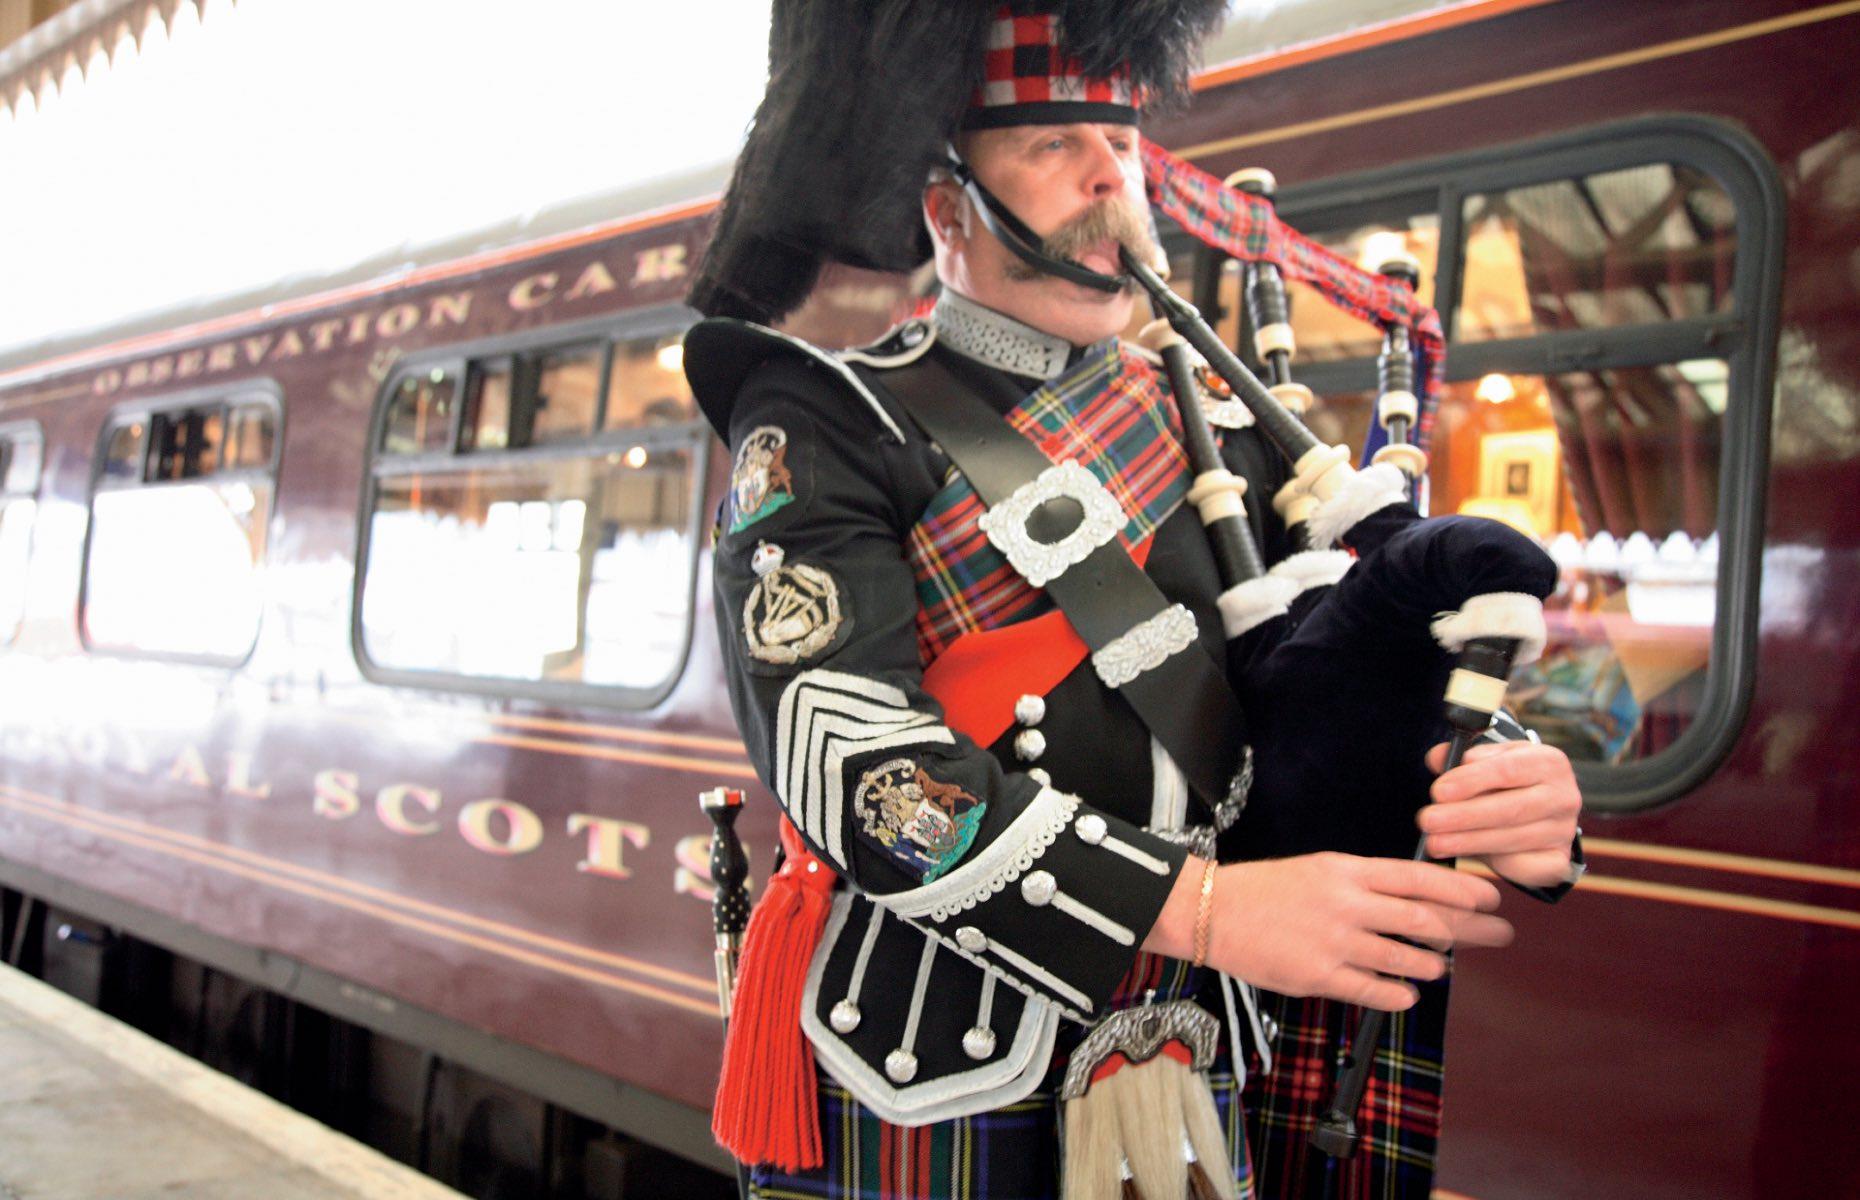 <p>With polished mahogany-clad cars and Edwardian-inspired decor, the <a href="https://www.belmond.com/trains/europe/scotland/belmond-royal-scotsman">Royal Scotsman</a> is among the UK’s most luxurious sleeper trains. With routes ranging from two to seven nights, this ‘palace on wheels’ journeys through some of the most majestic Highland scenery, taking in historic castles, monuments, lochs and glens. Most trips also include day excursions to top sights such as the Strathisla Distillery and Rothiemurchus Estate.</p>